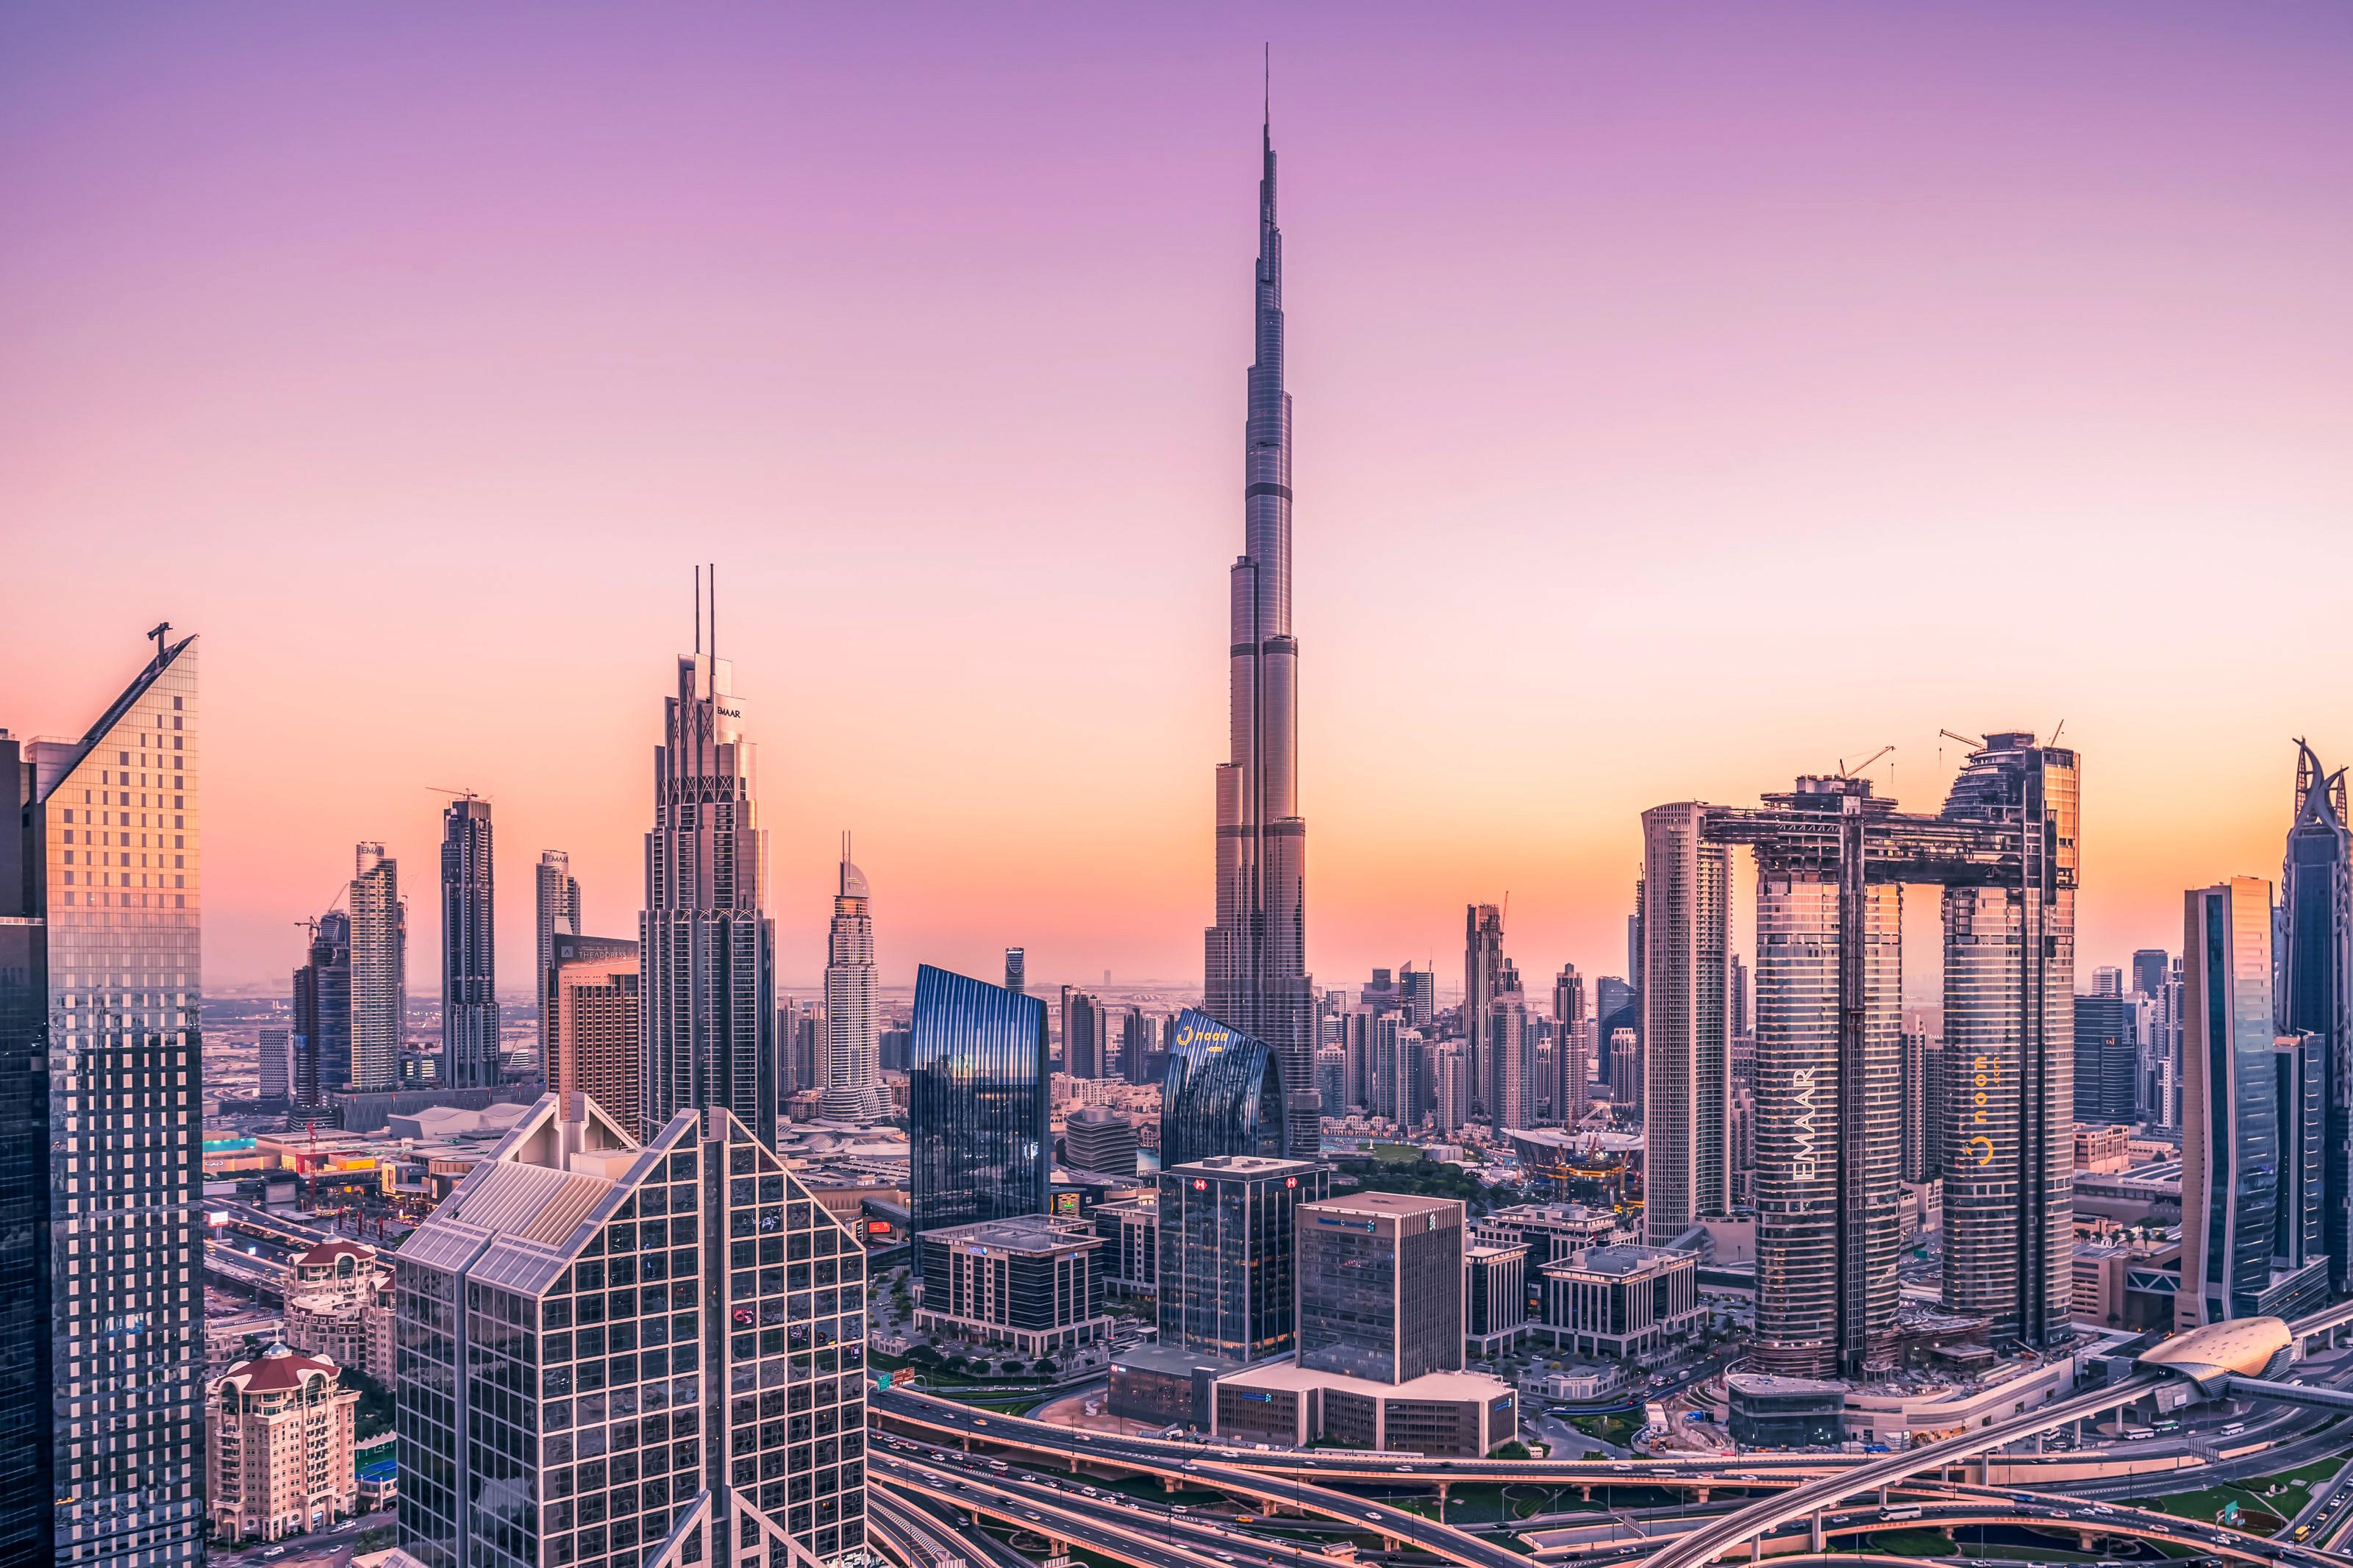 Dubai 4K wallpaper for your desktop or mobile screen free and easy to download